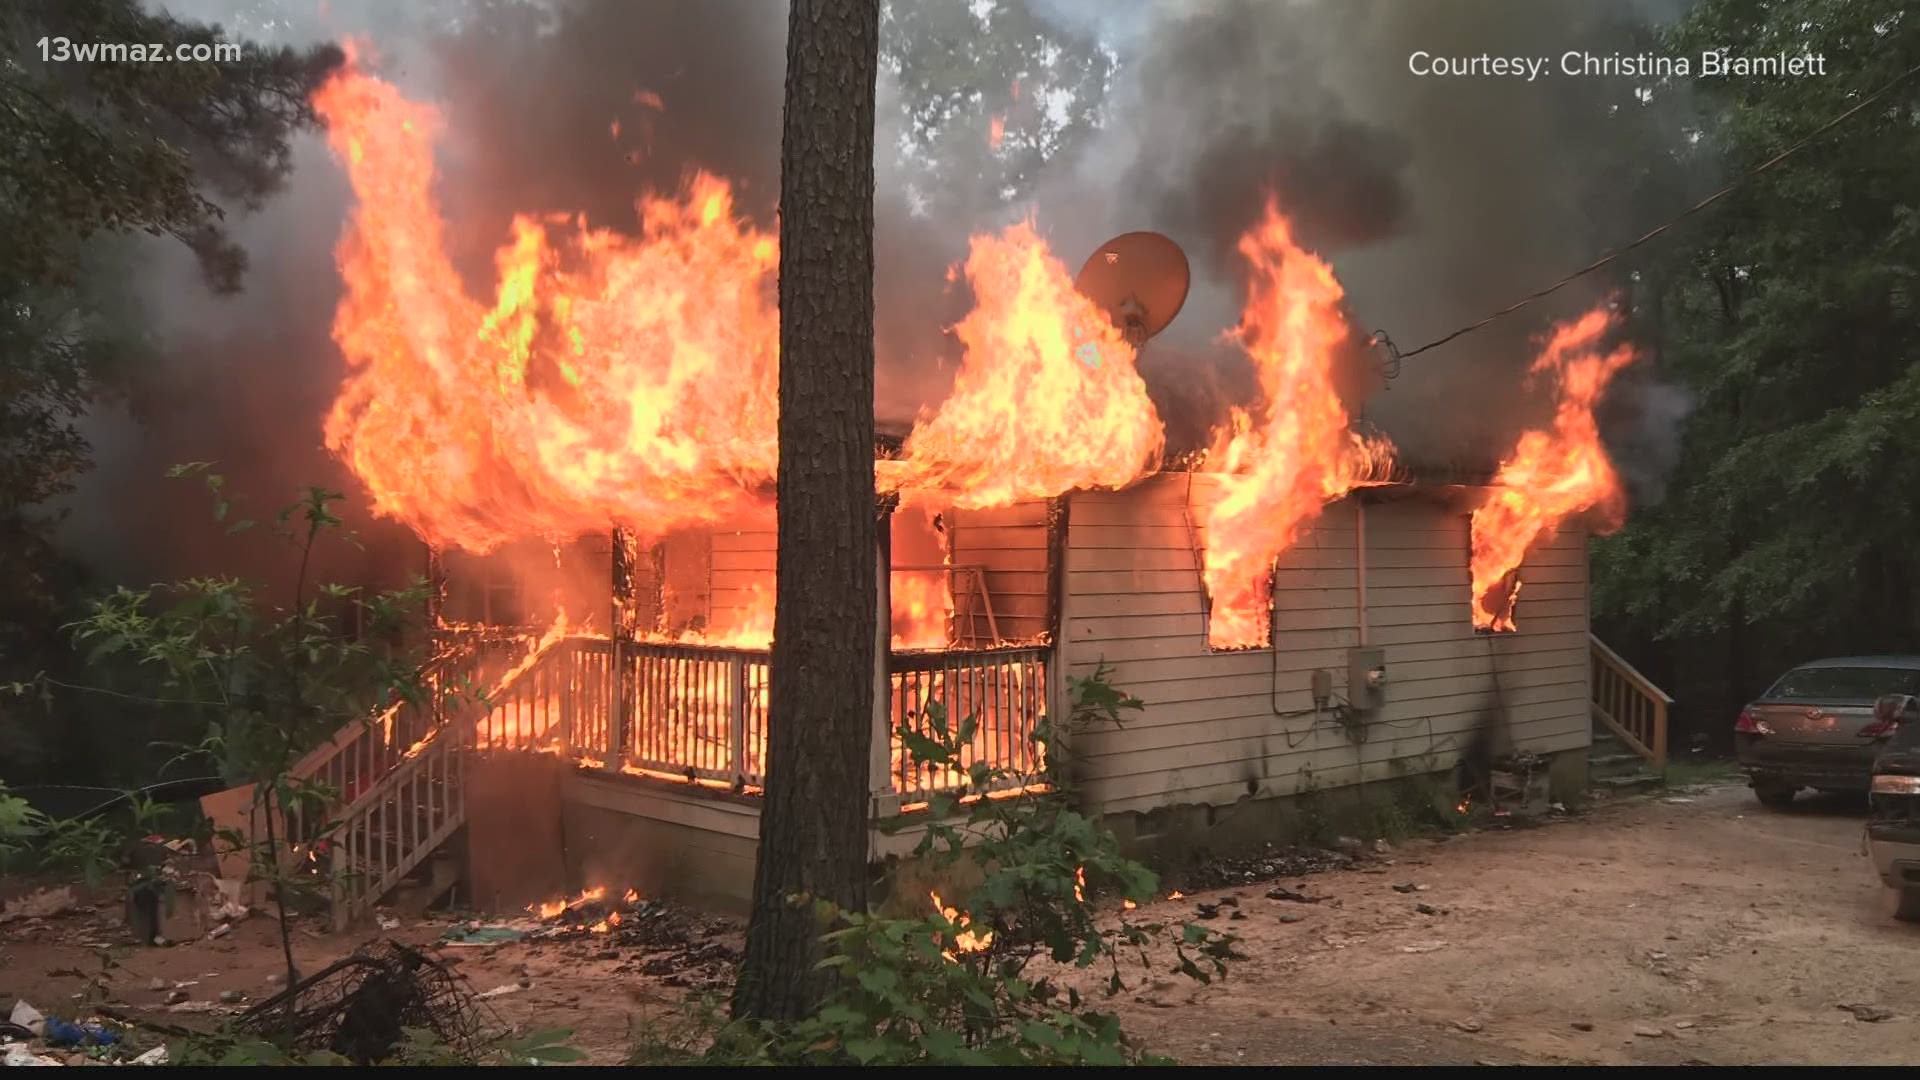 One Monroe County family of 8 is trying to figure out their next steps after losing their home and everything they own in a fire.